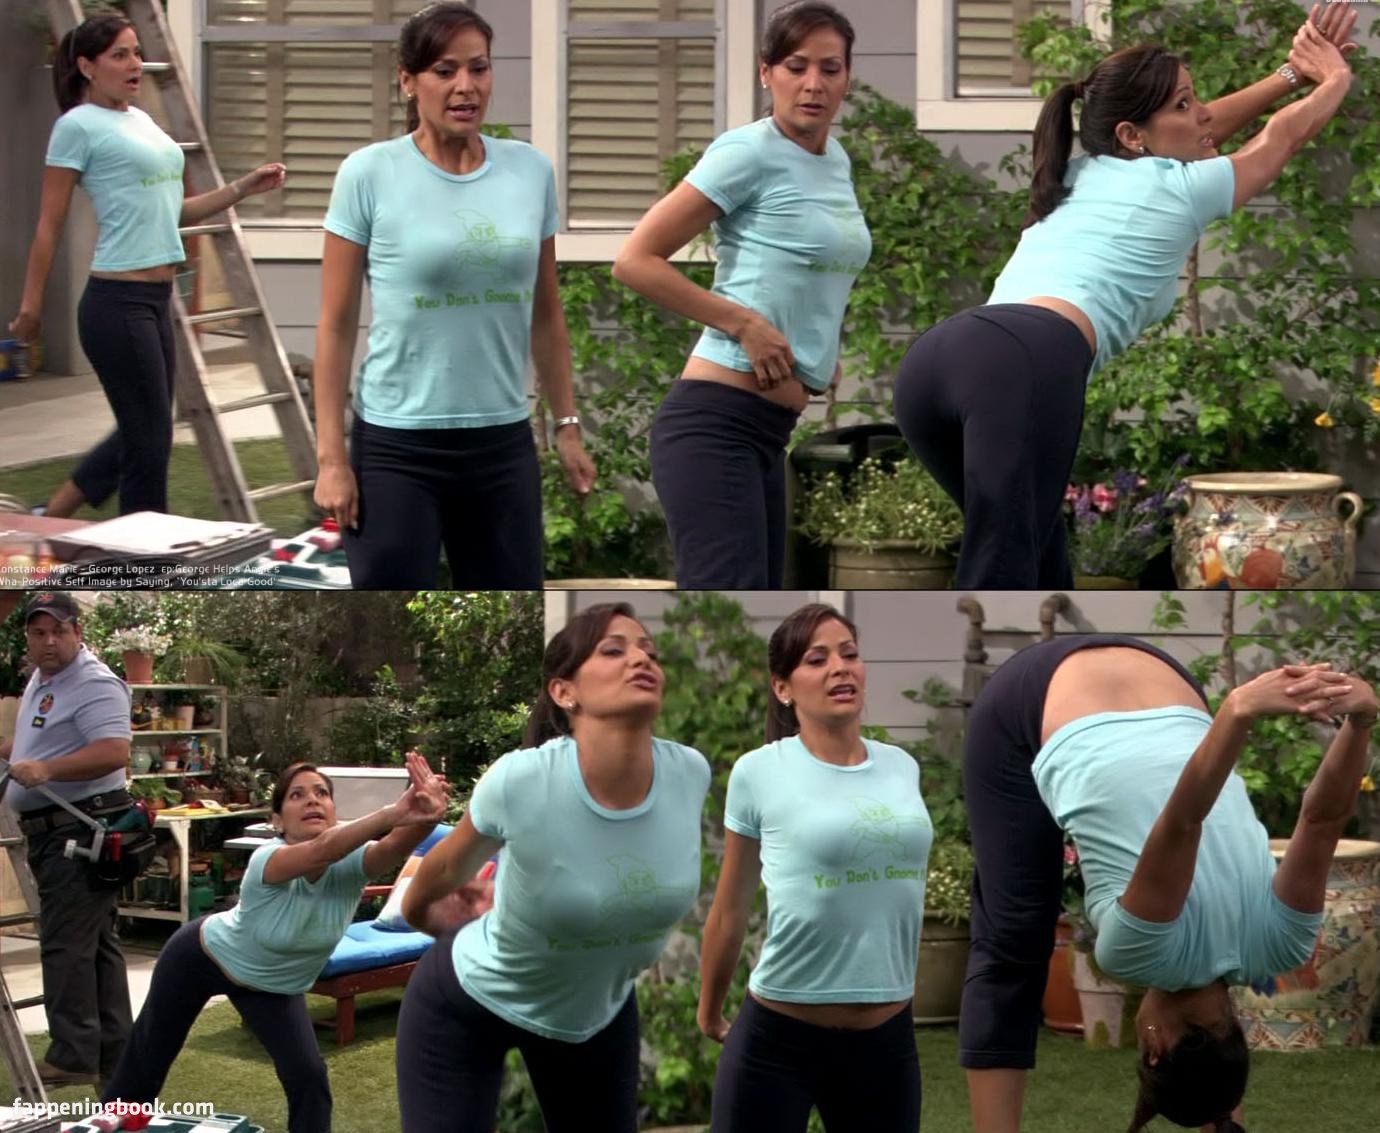 Marie photos constance leaked Constance Marie